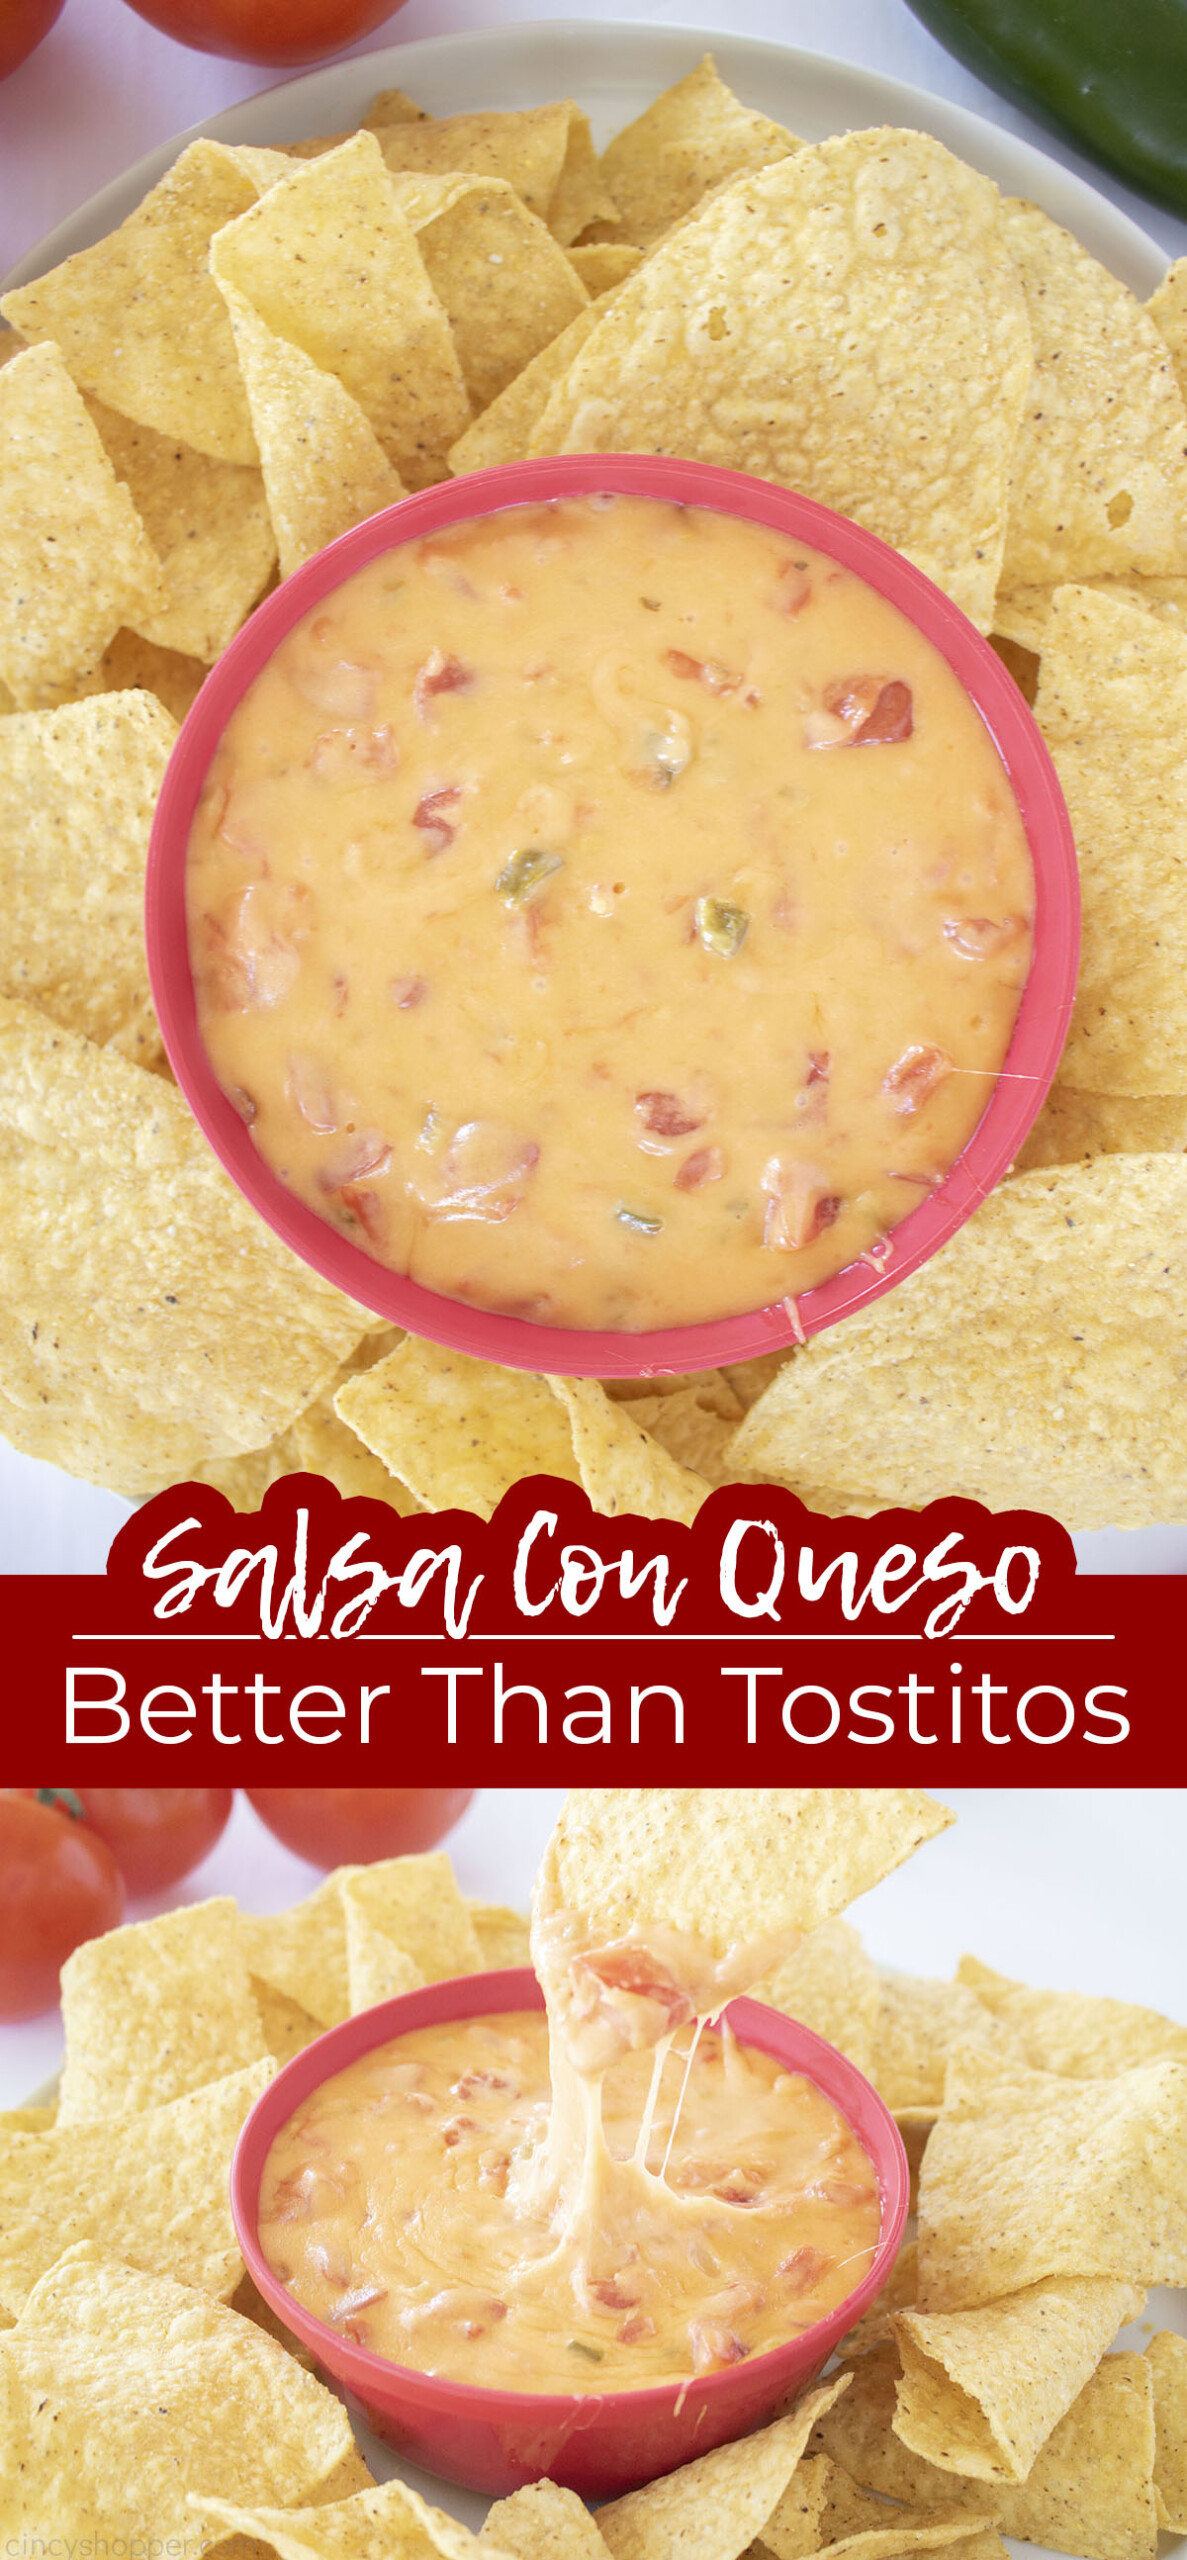 Long Pin Text on image Salsa Con Queso Better than Tostitos